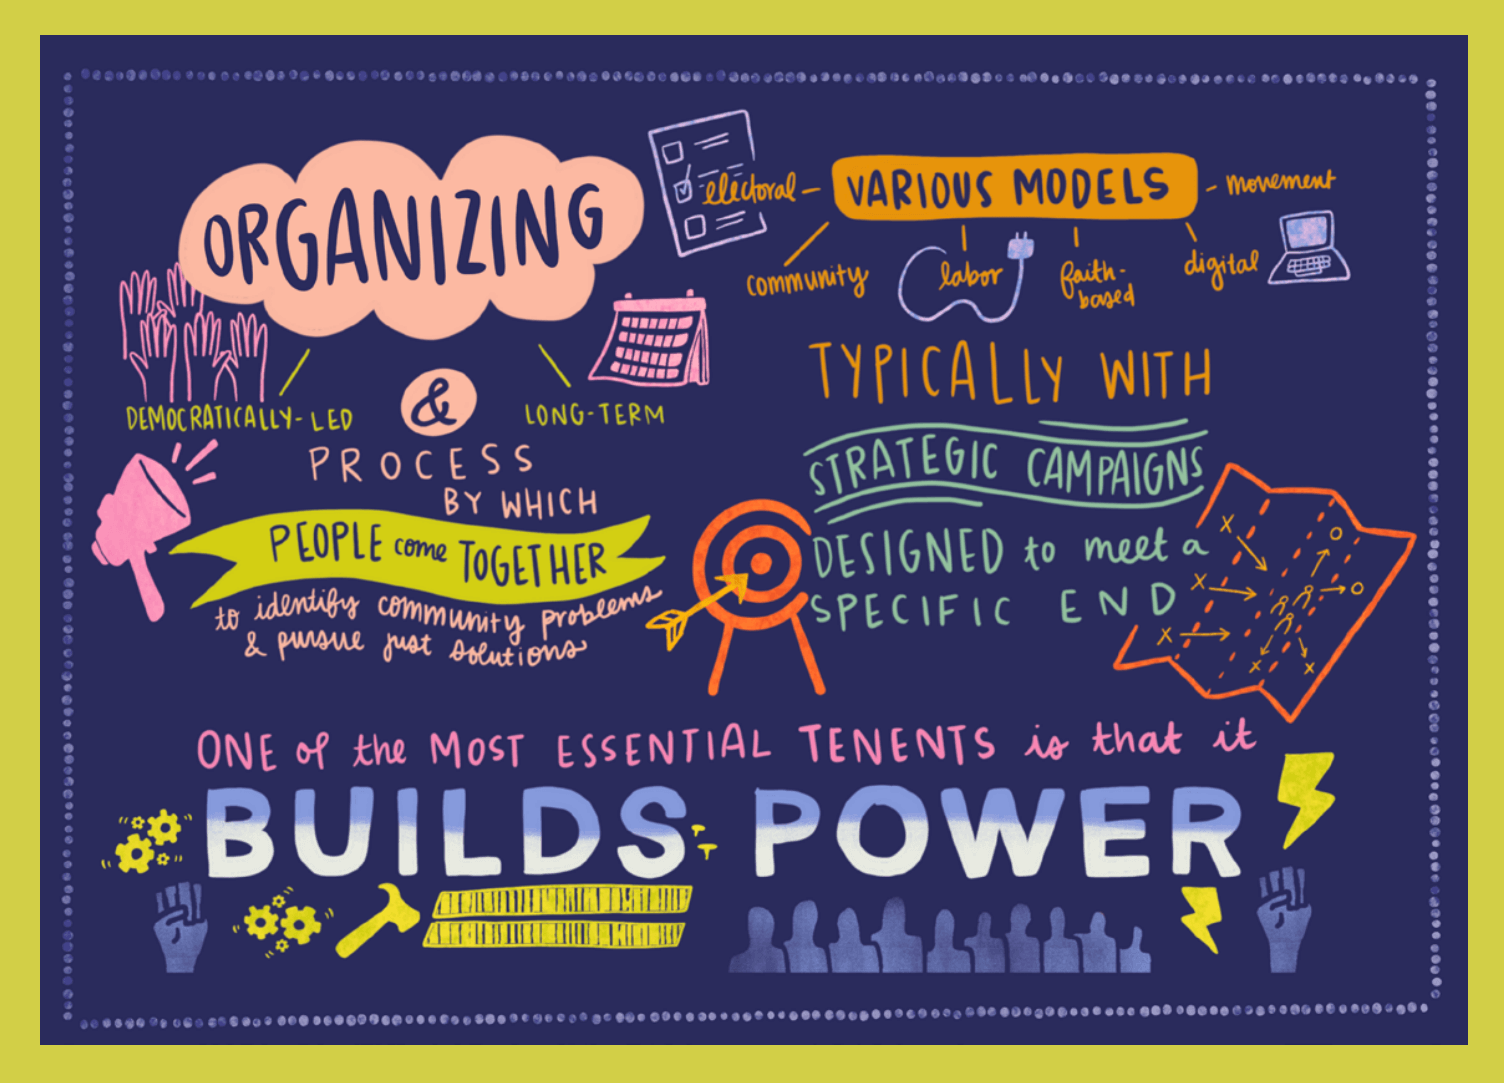 Graphic illustration summary: One of the most essential tenets of organizing is that it builds power